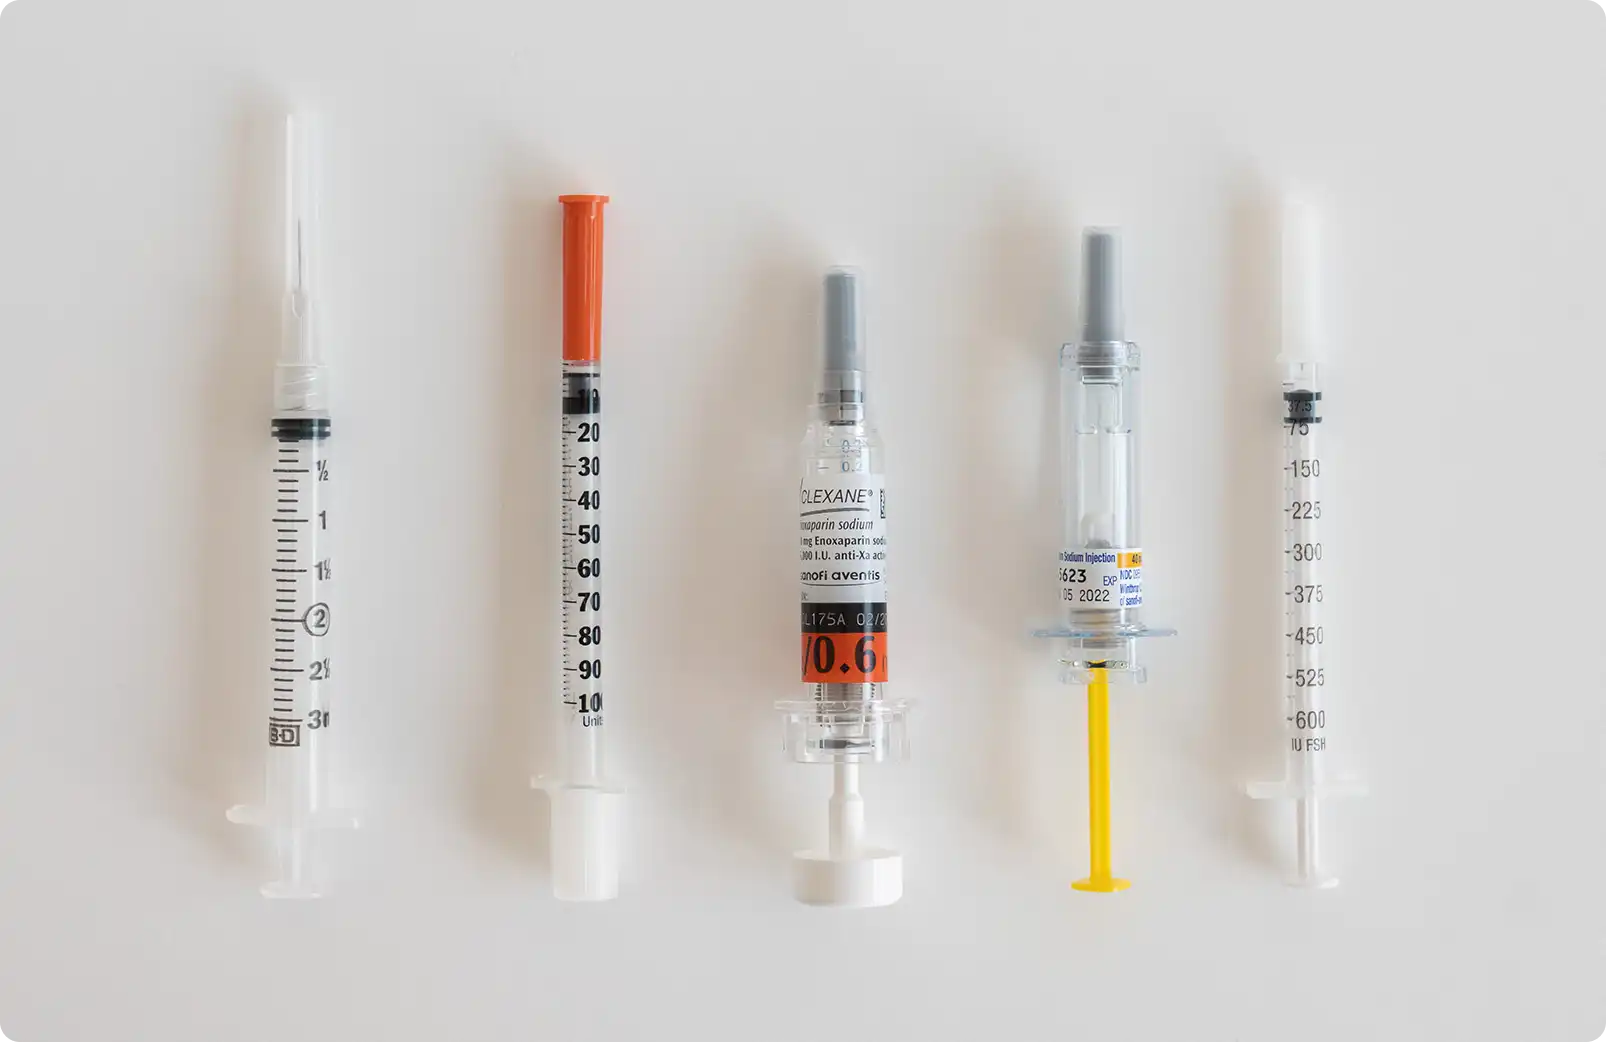 A picture of many injection needles.